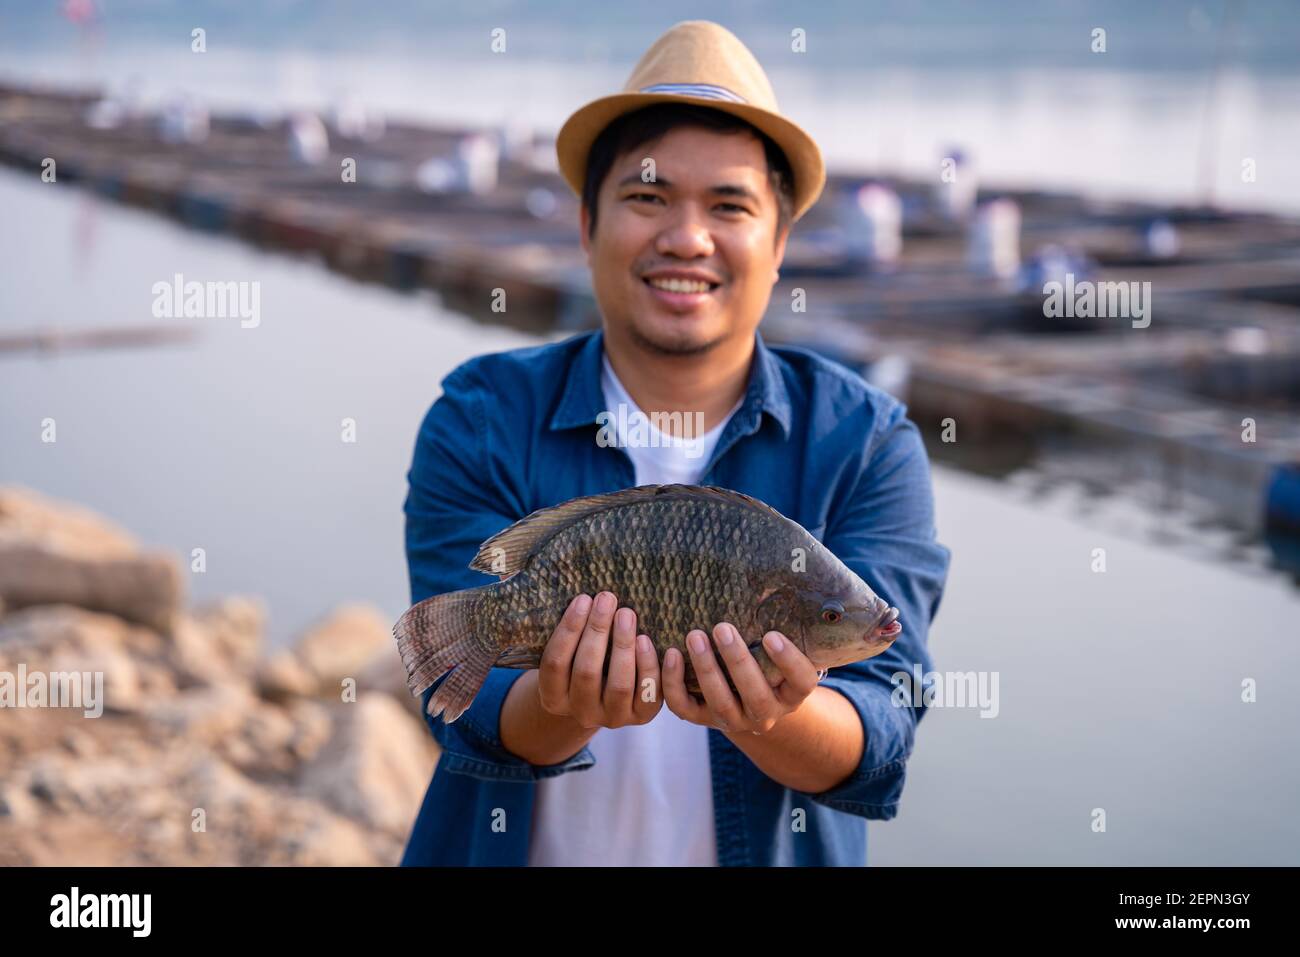 Fisherman holding big tilapia fish, freshwater fish that was raised in ponds and cages. Stock Photo